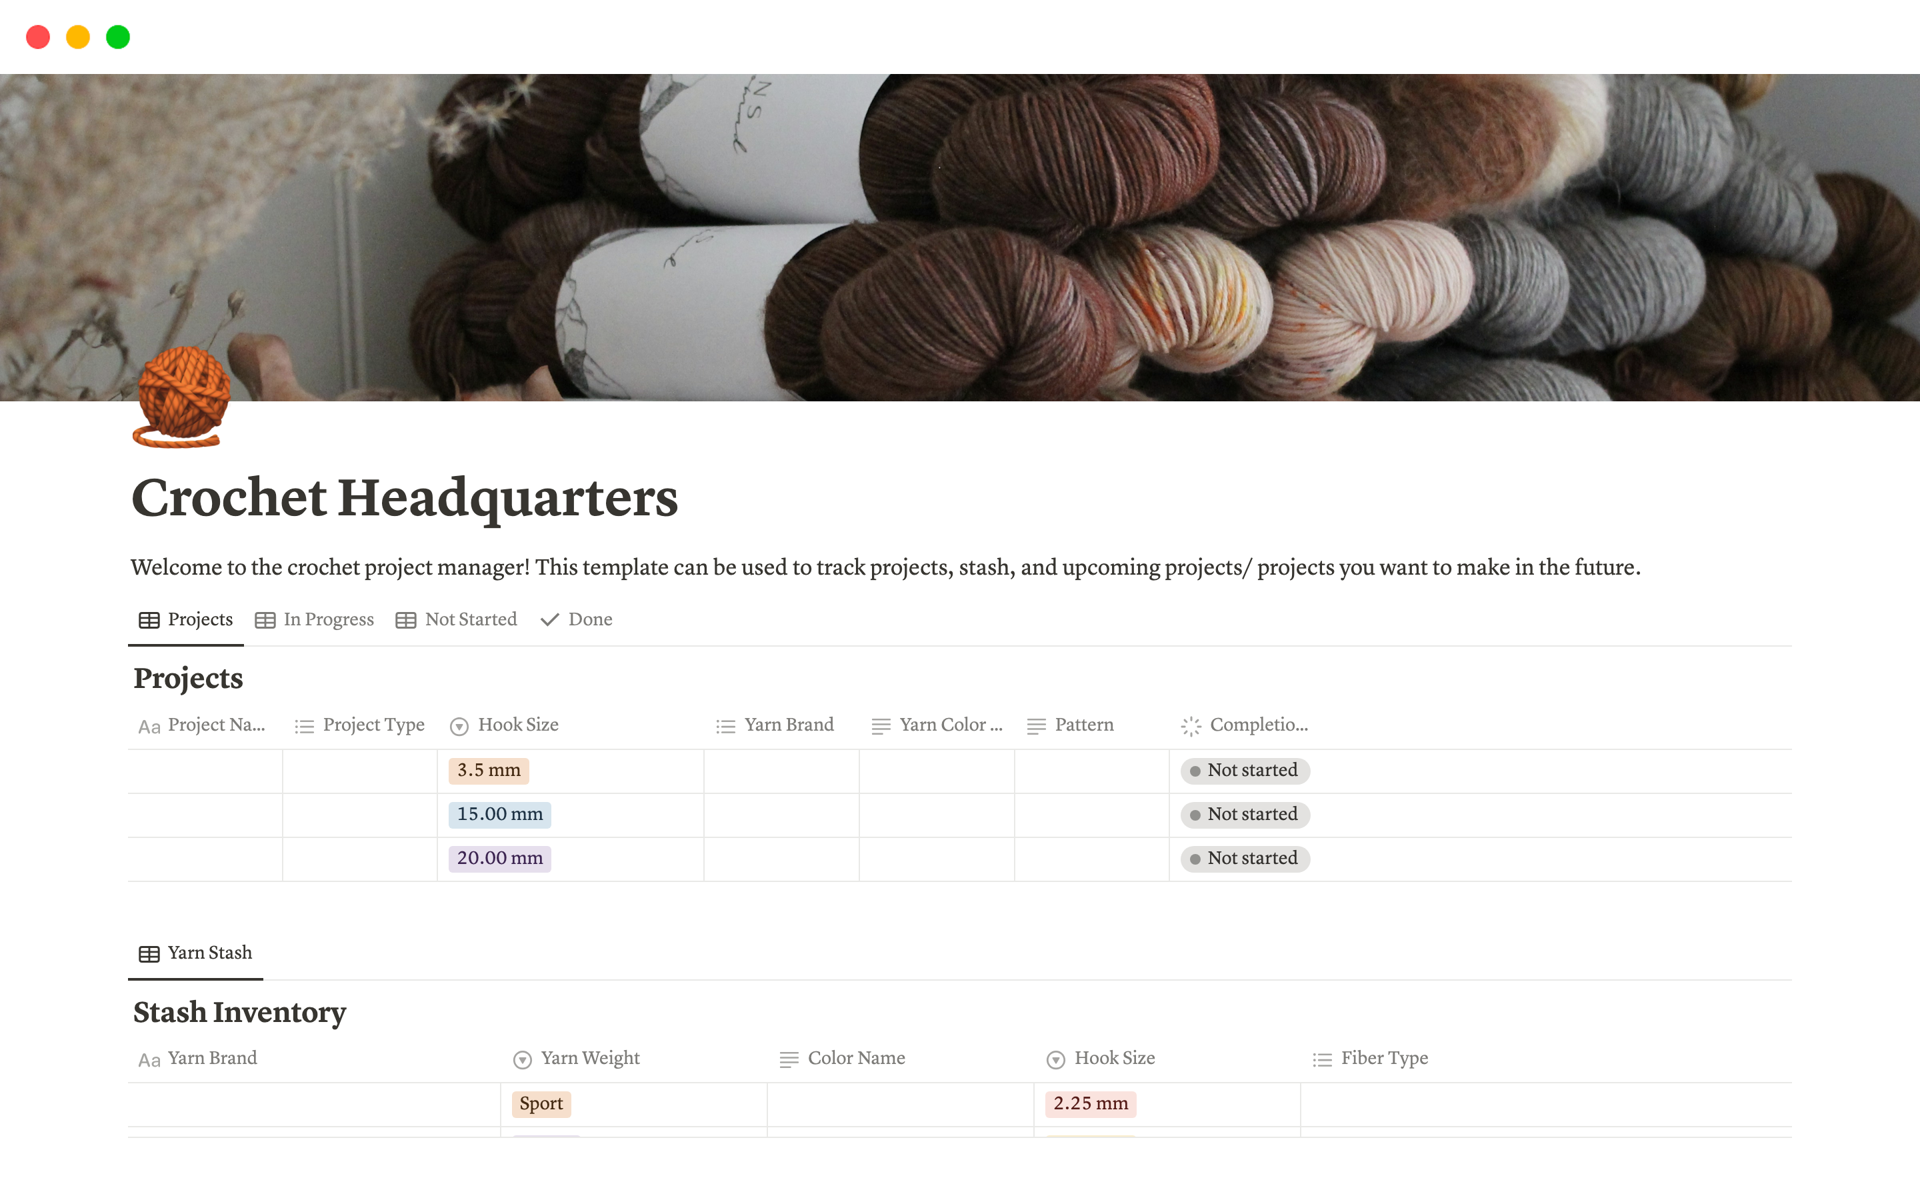 A great way to keep up with all things crochet and yarn!